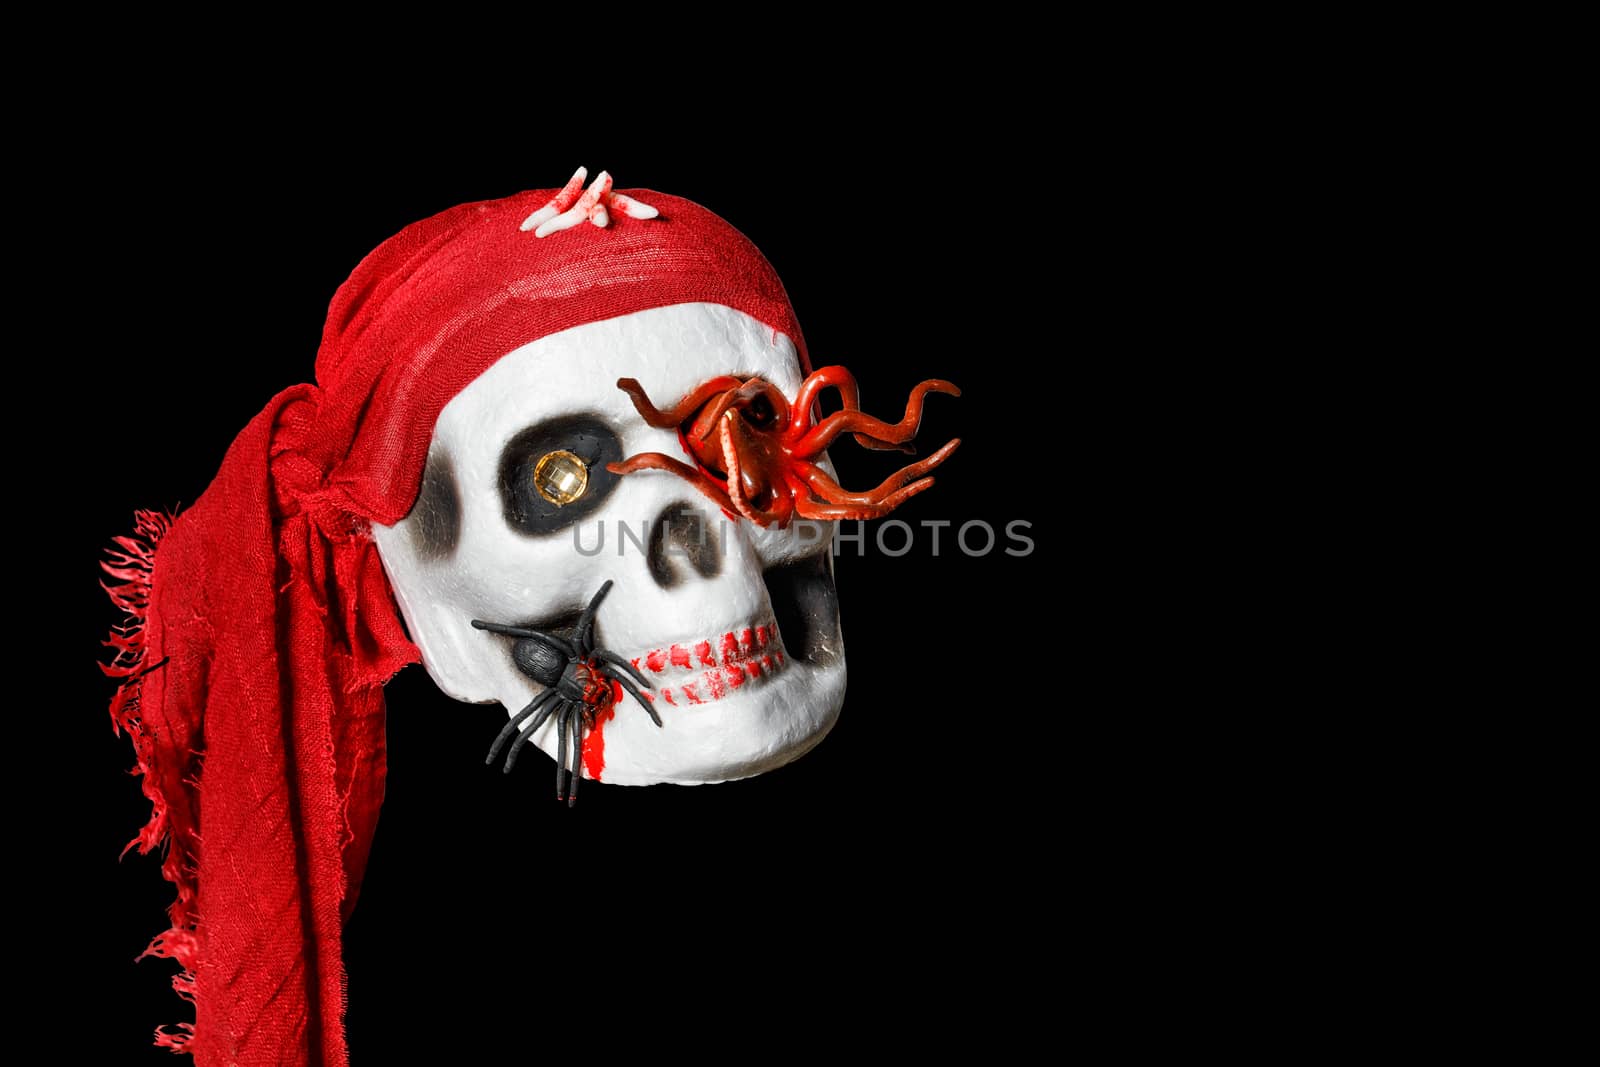 Halloween skull doll in a red bandana, decorated with an octopus in the eye socket and a spider on the cheekbone, isolated on a black background.